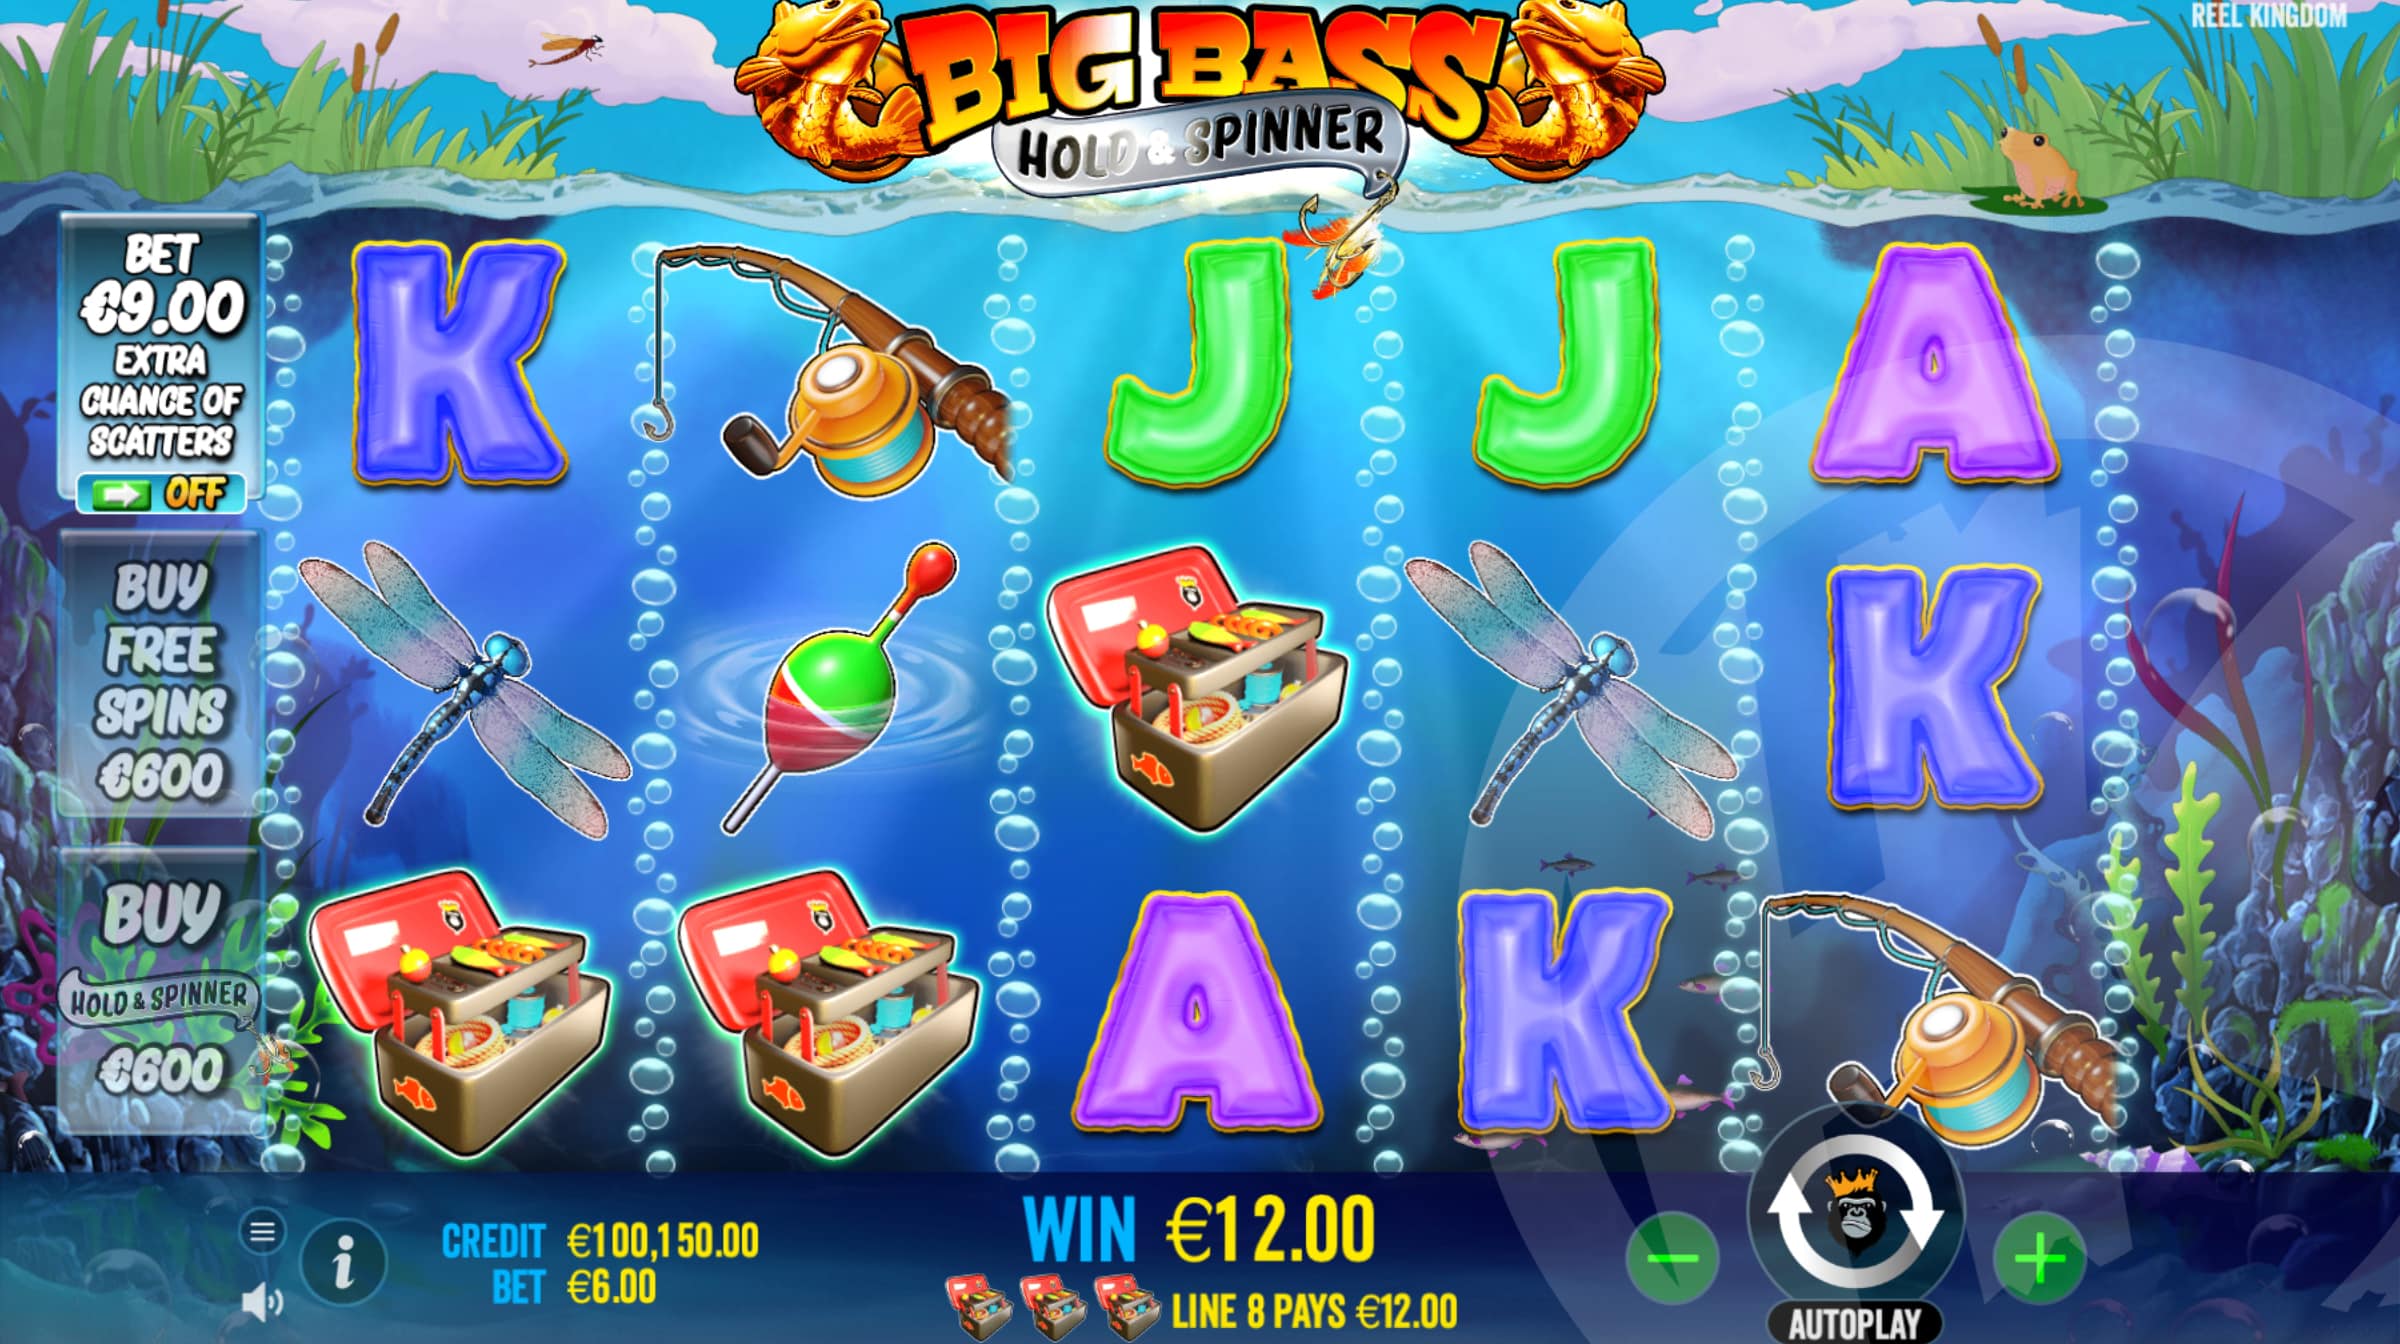 Big Bass Bonanza - Hold & Spinner Offers Players 10 Fixed Win Lines